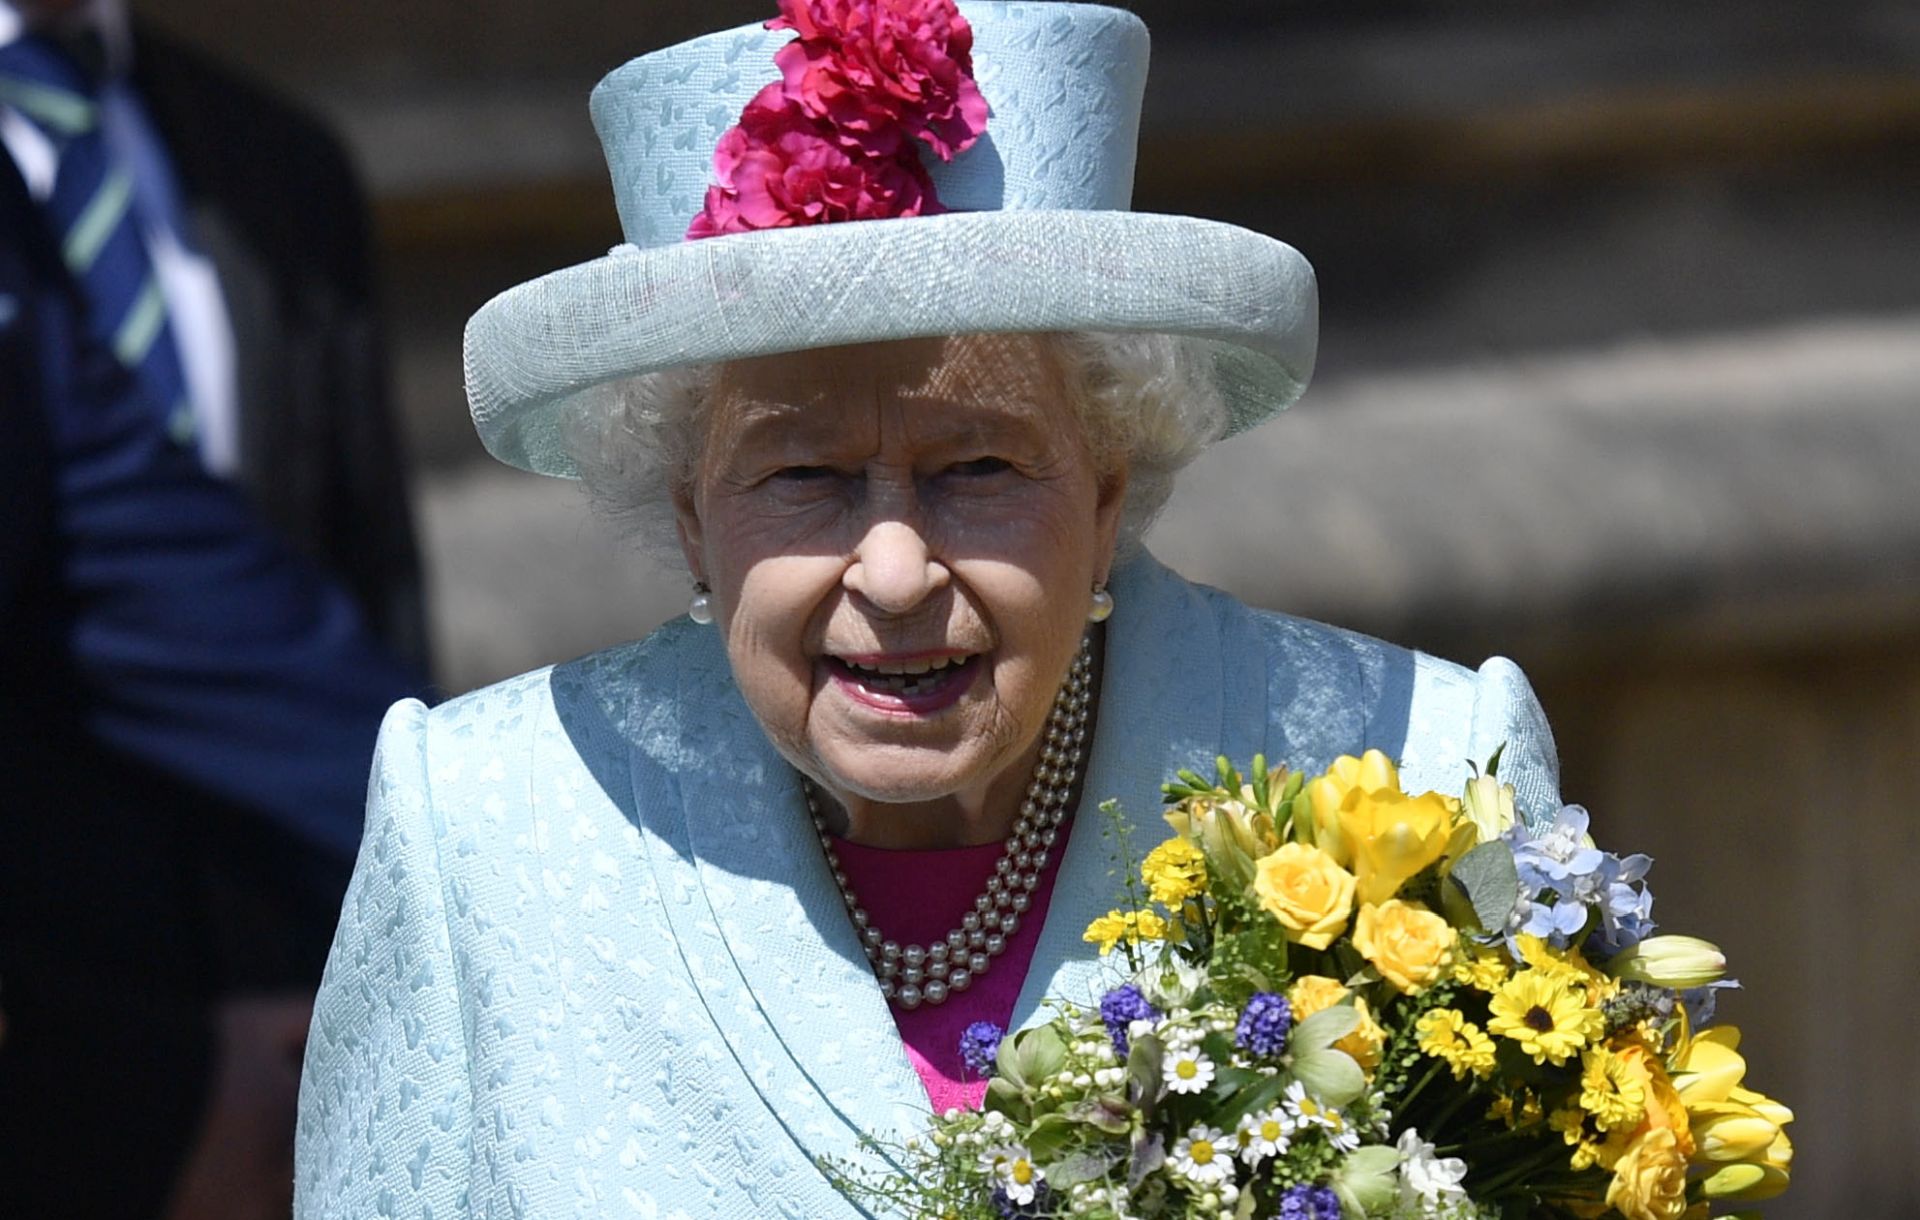 epa07519441 Britain's Queen Elizabeth leaves the annual Easter Sunday Service at St Georges Chapel in Windsor Castle, Britain, 21 April 2019. The Easter Mattins Service is attended every year by the Royal Family. This year the service falls on the Queen's Elizabeth II birthday, who turns 93.  EPA/NEIL HALL